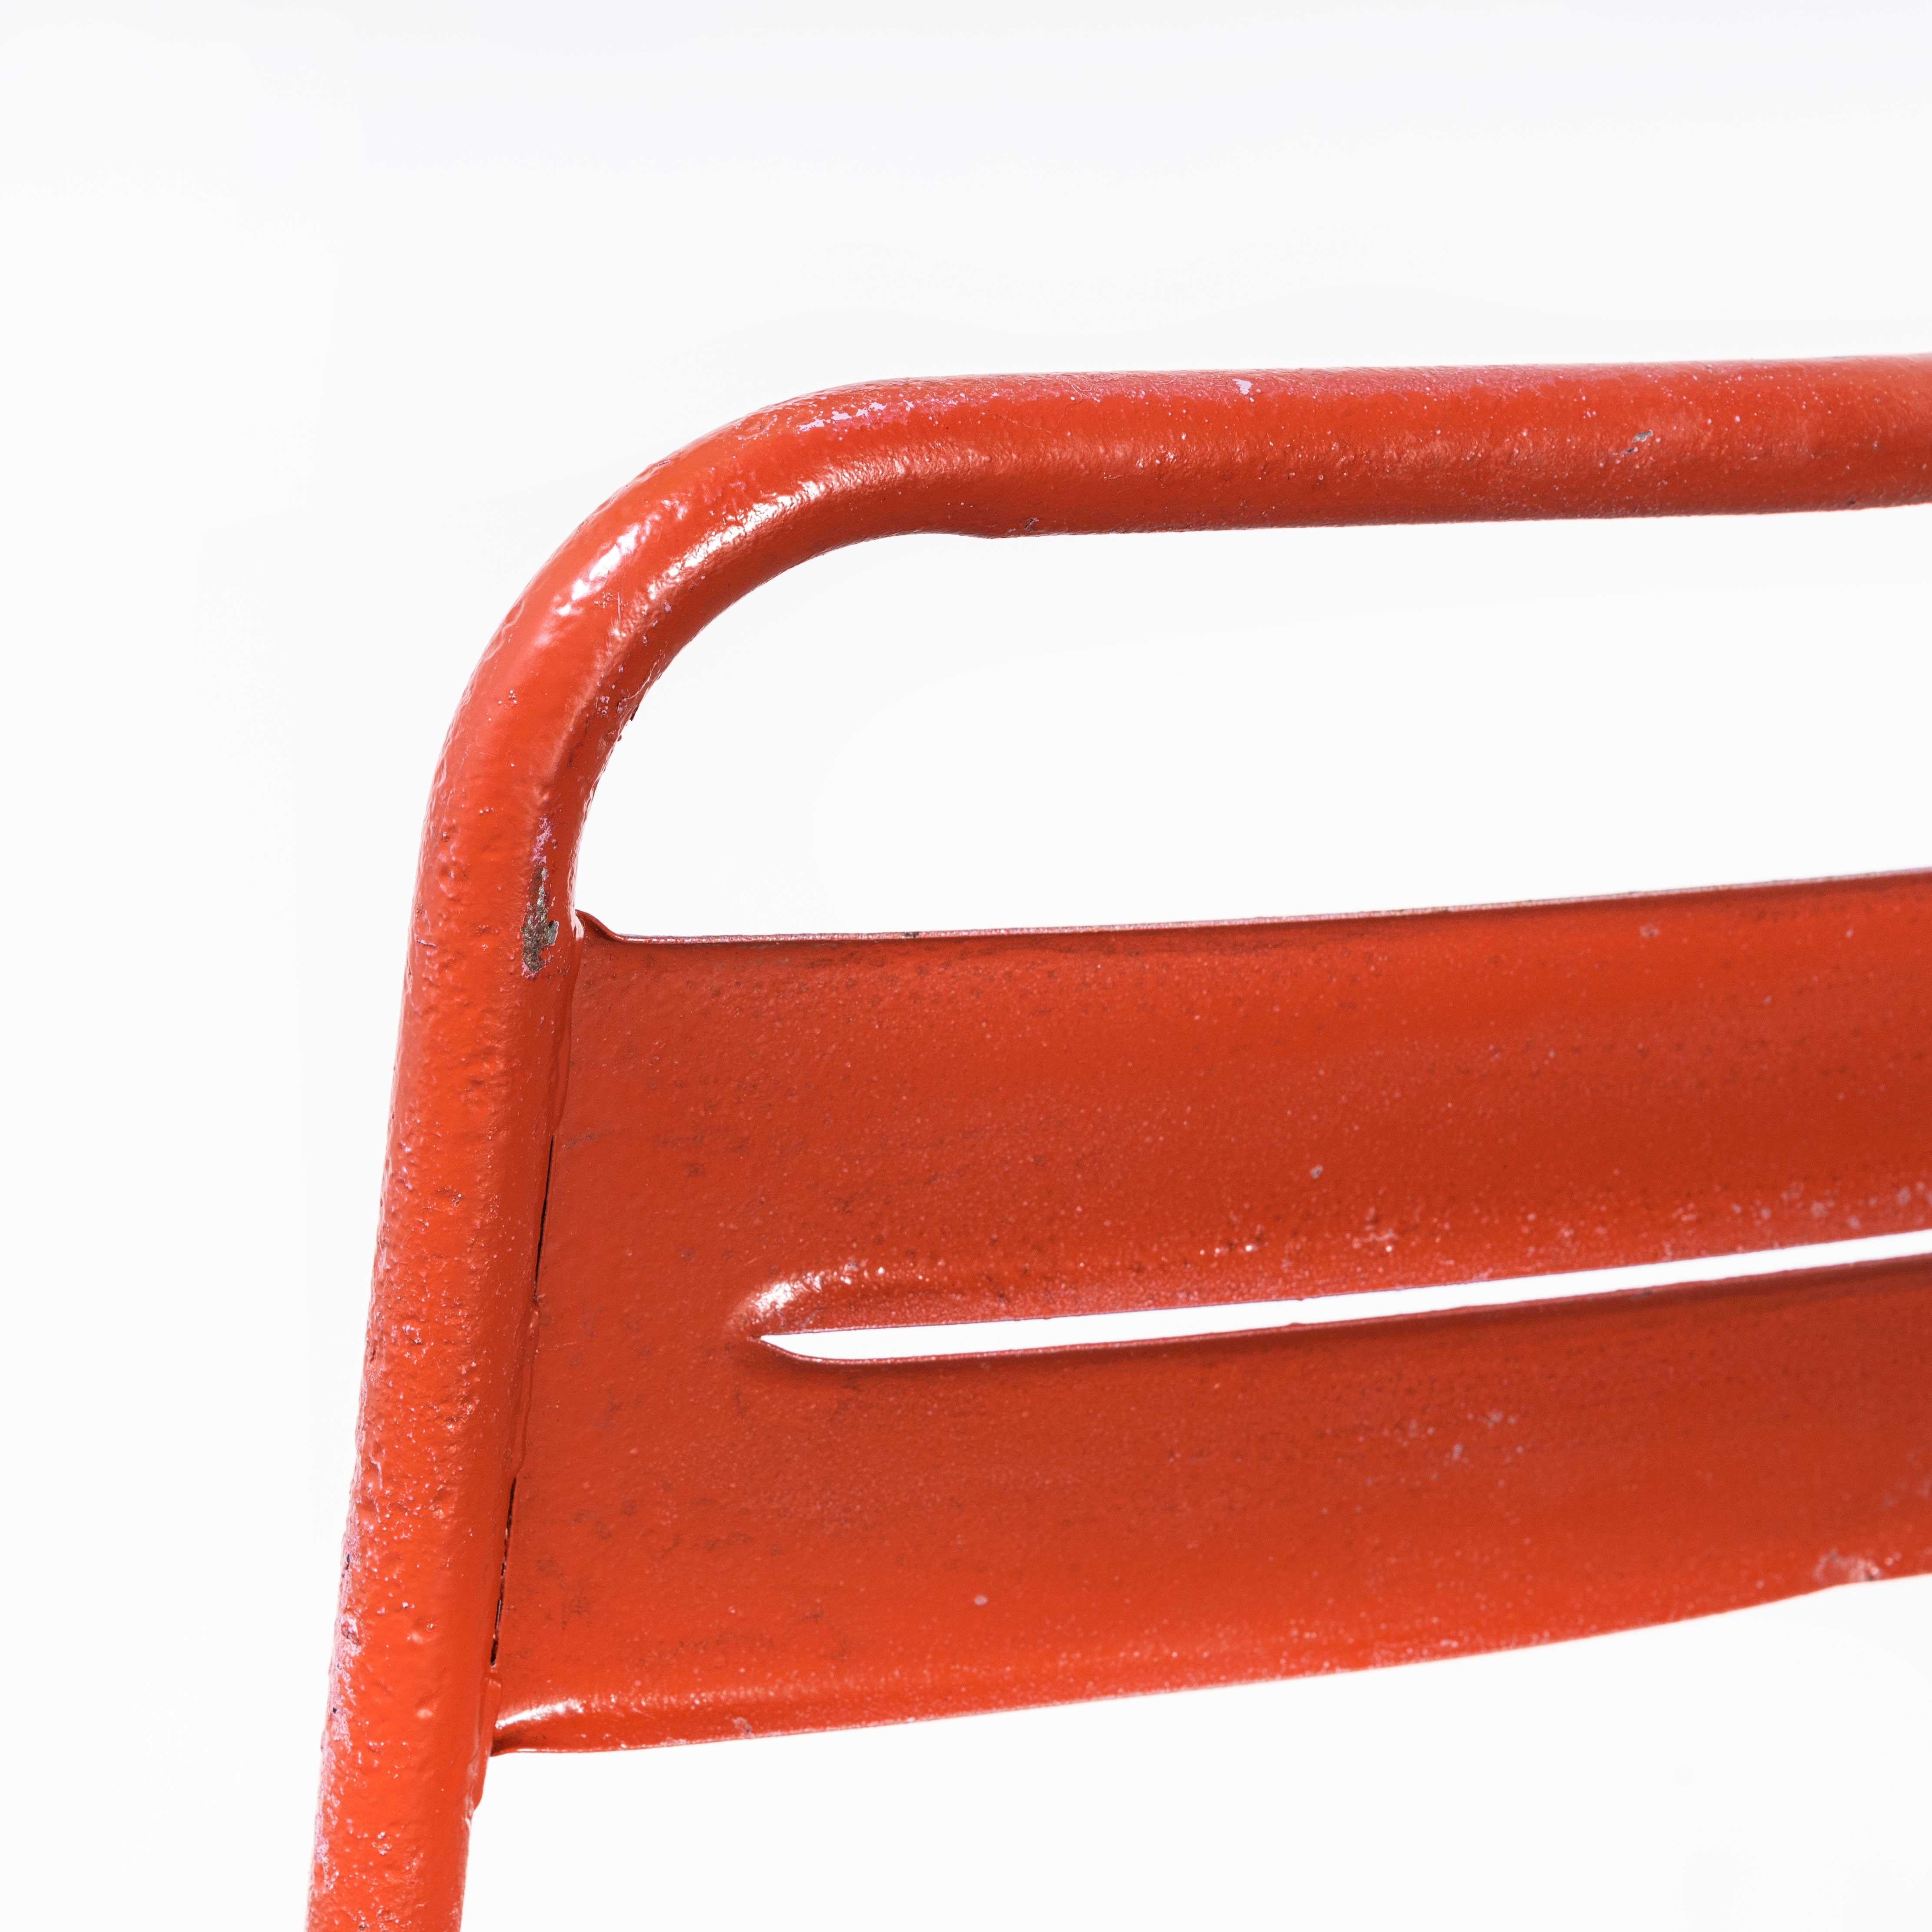 1950’s French red metal outdoor dining chairs – set of five
1950’s French red metal outdoor dining chairs – set of five. Similar to Tolix but not made by Tolix, these chairs were industrially produced in France in the fifties. Good strong original